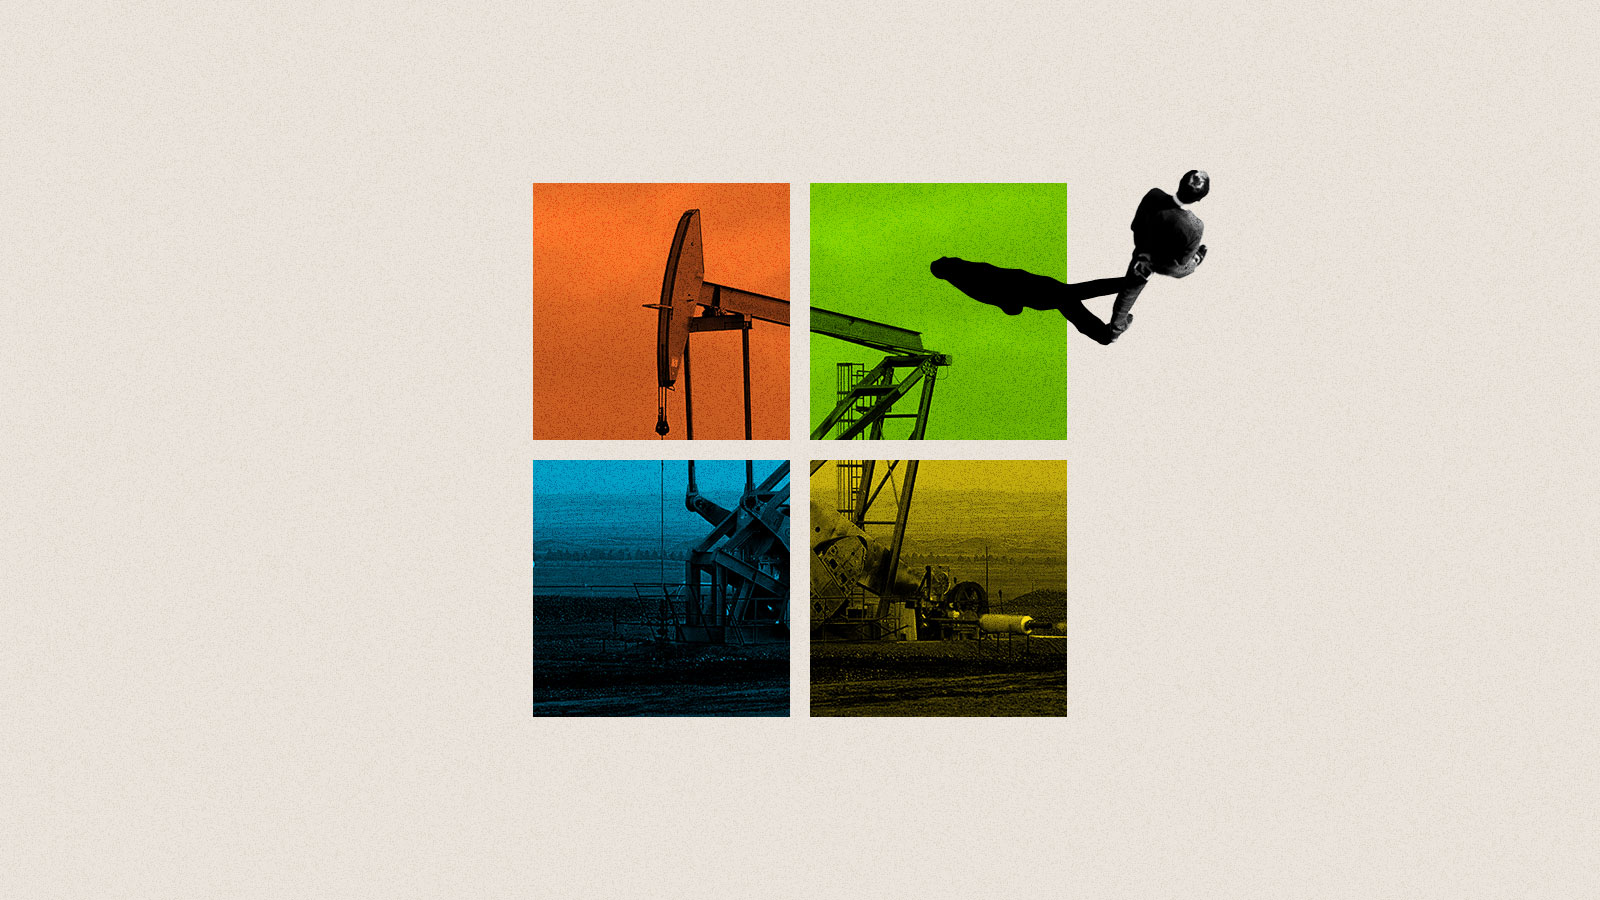 Microsoft employees spent years fighting the tech giant's oil ties. Now, they’re speaking out.